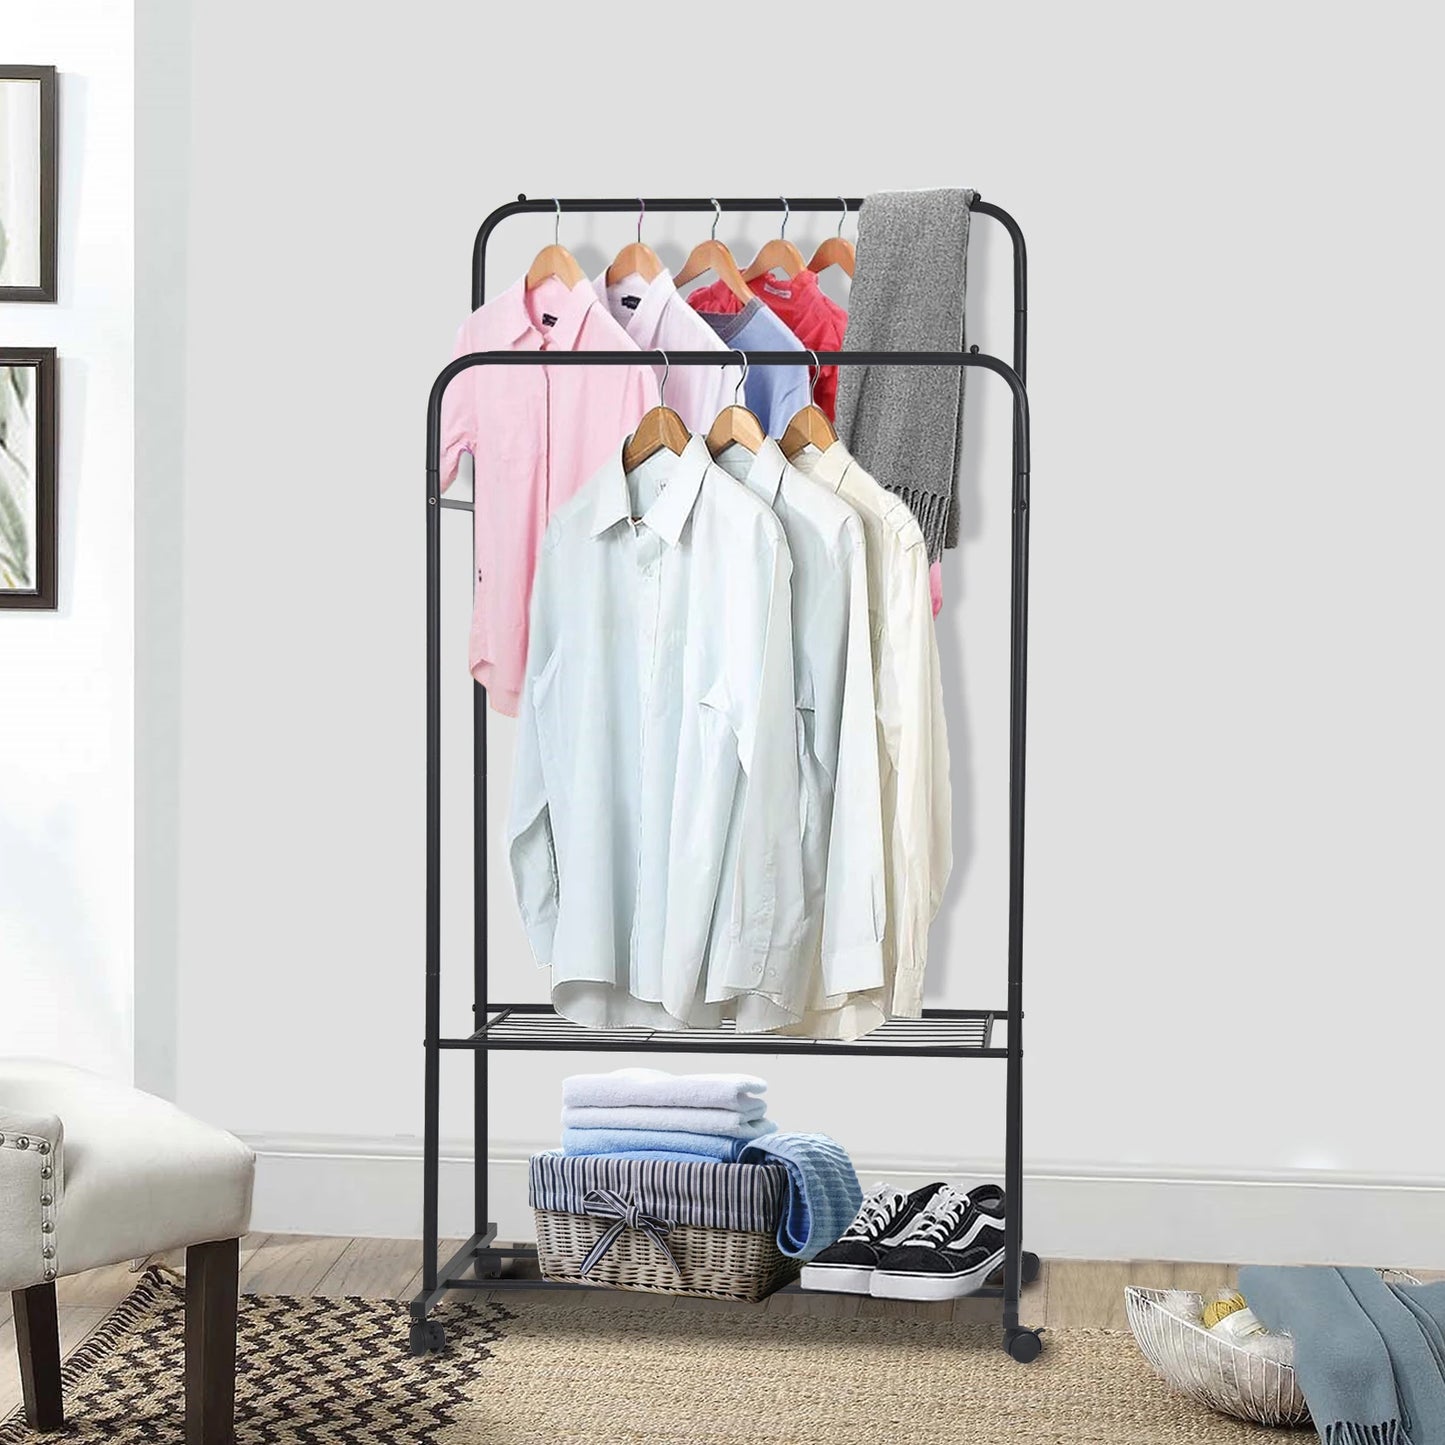 1.5m Large Clothes Rack Double Rail Rolling Stand